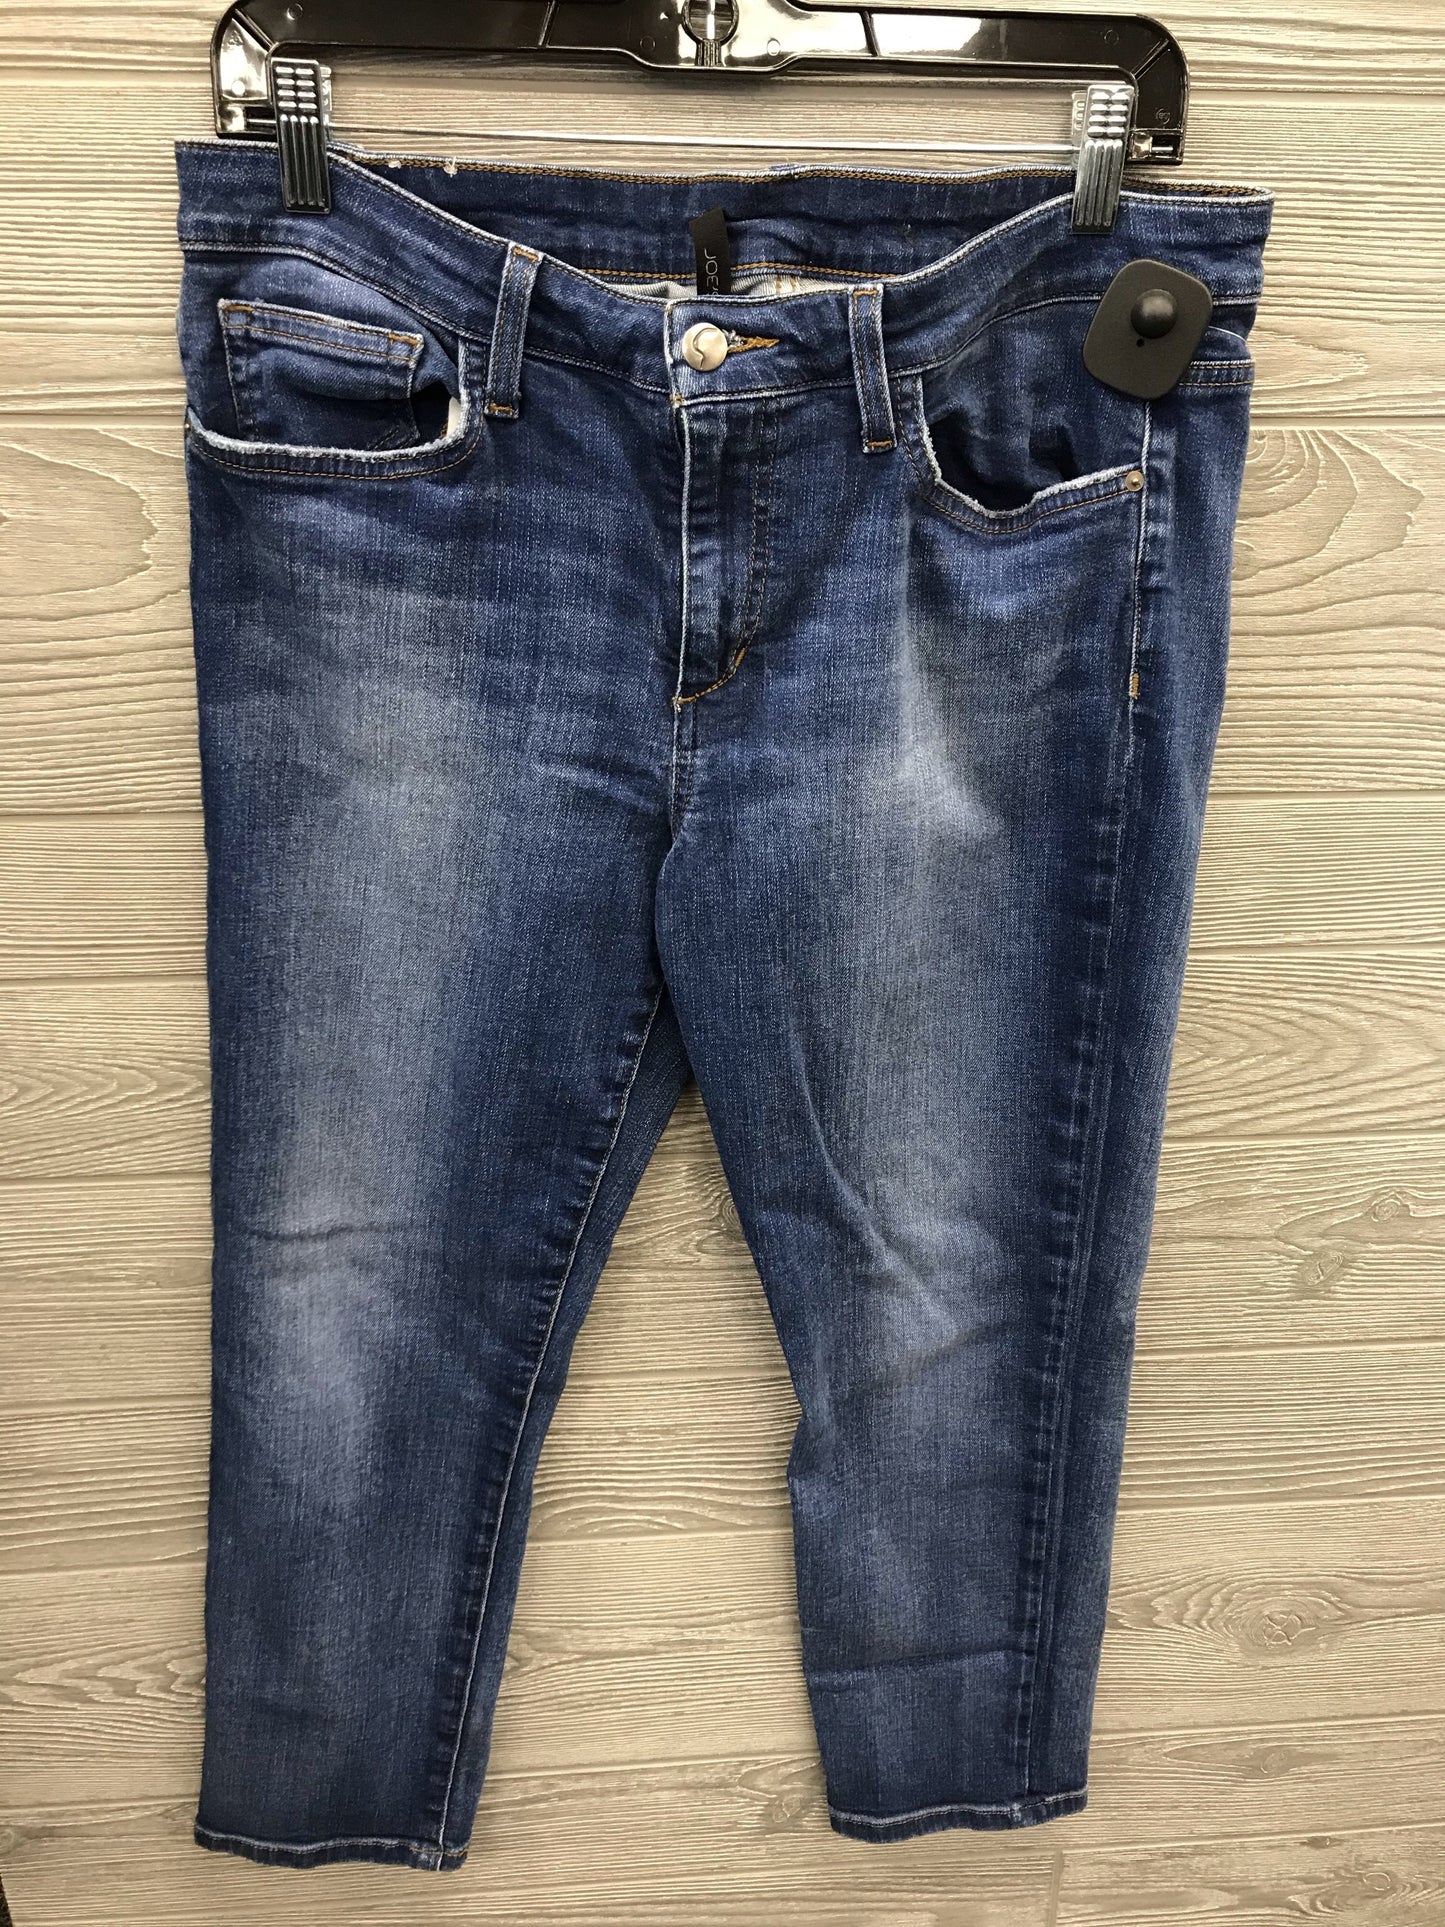 JEANS SIZE 10 BY JOES JEANS